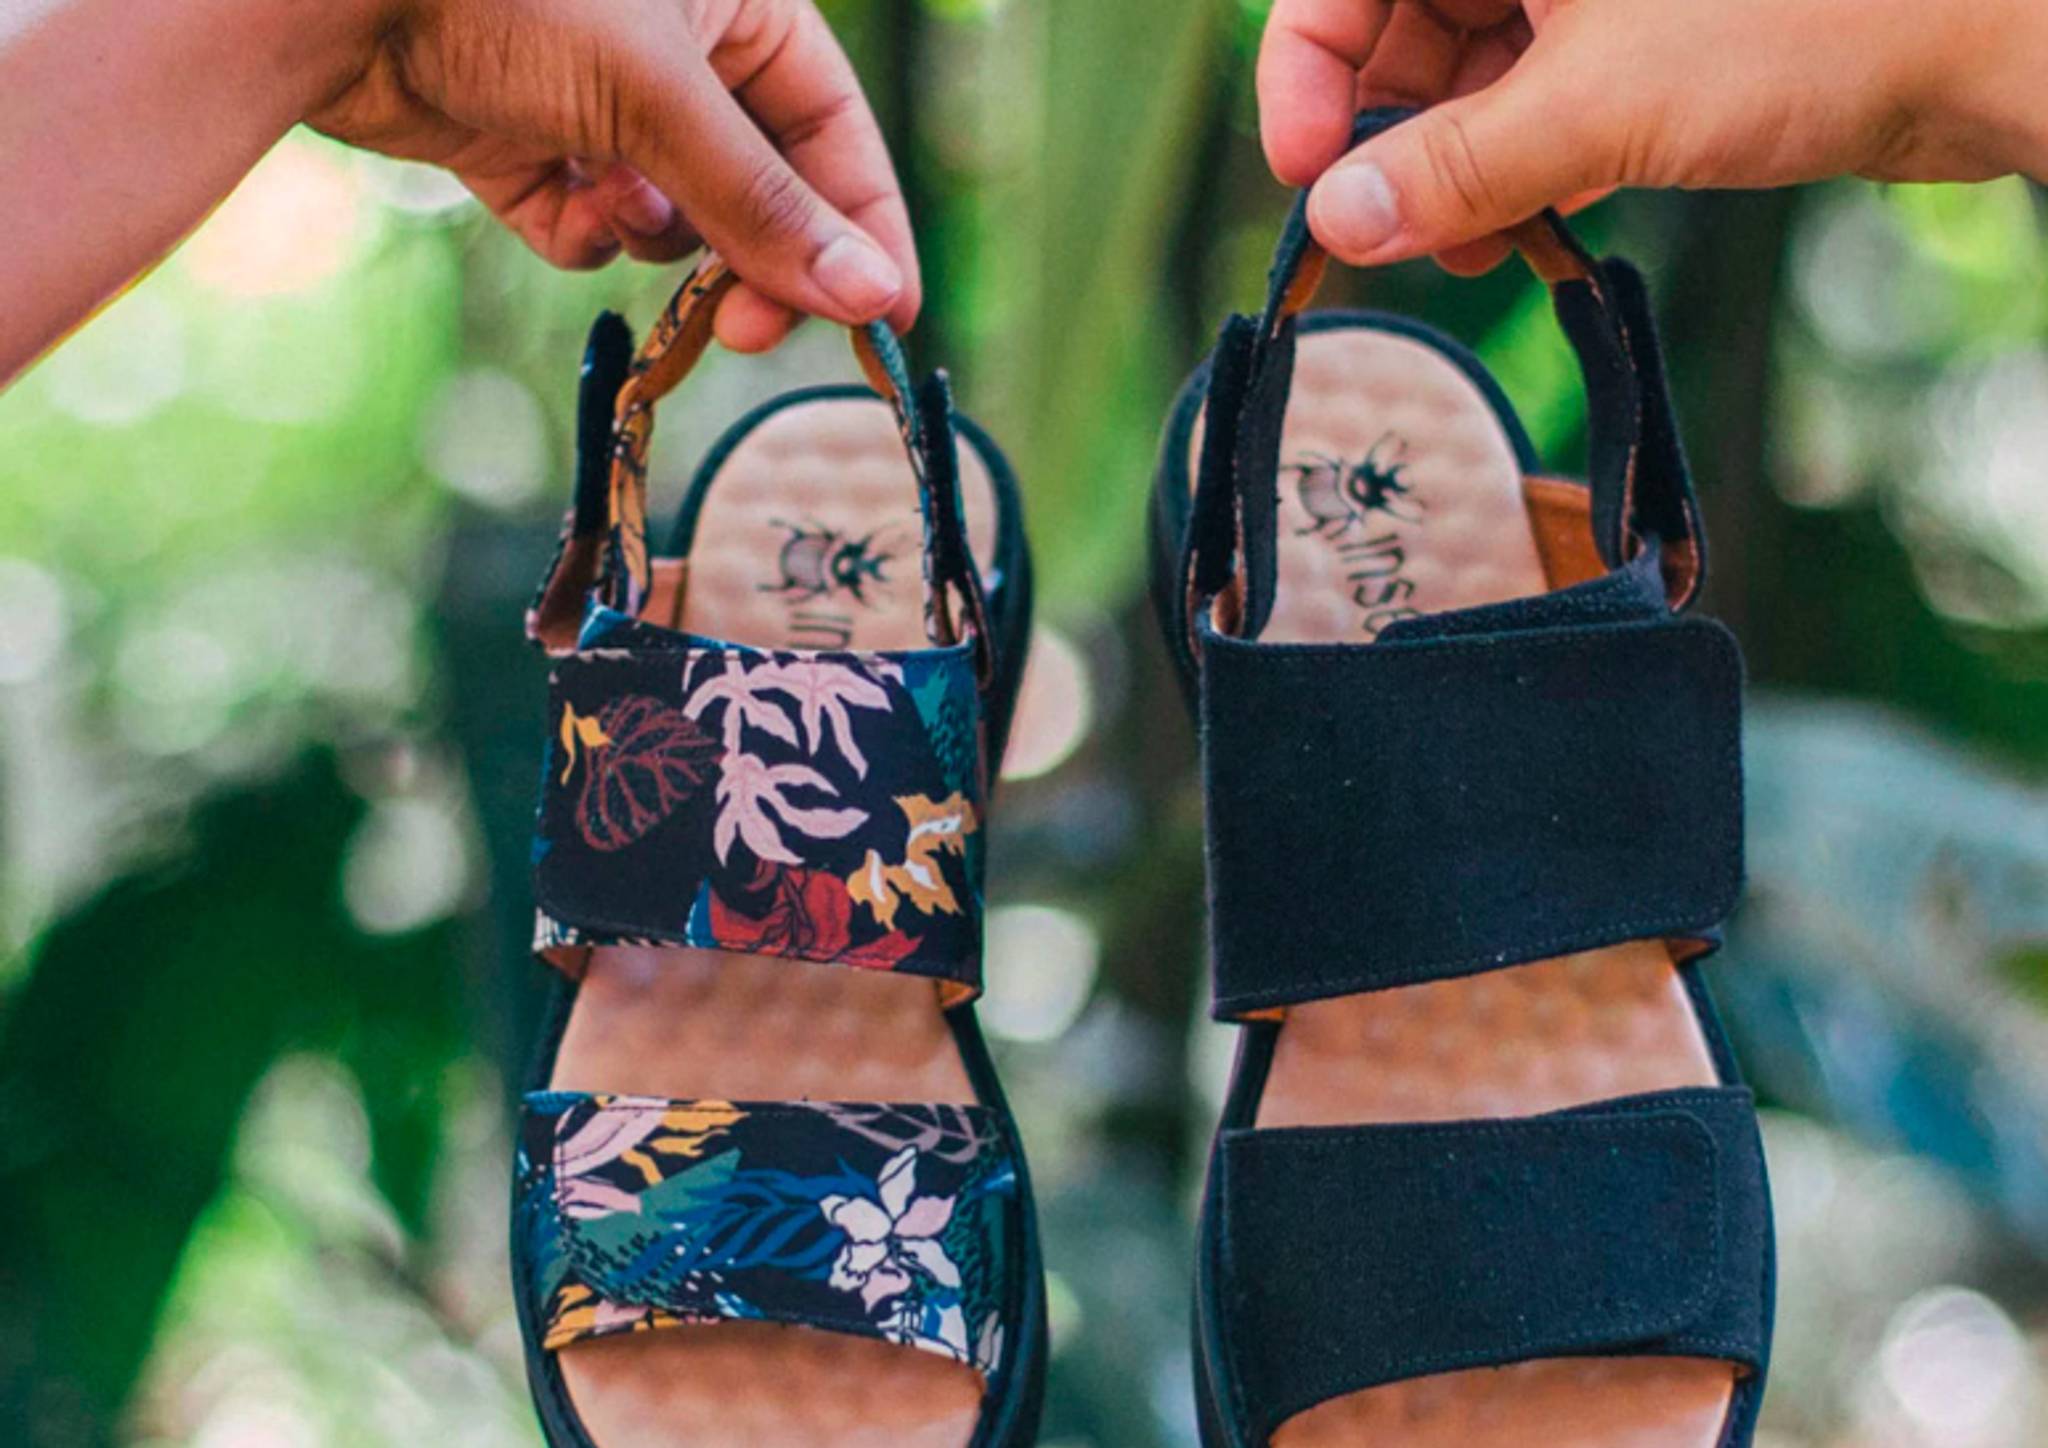 Upcycled Insecta shoes appeal to vegan fashionistas